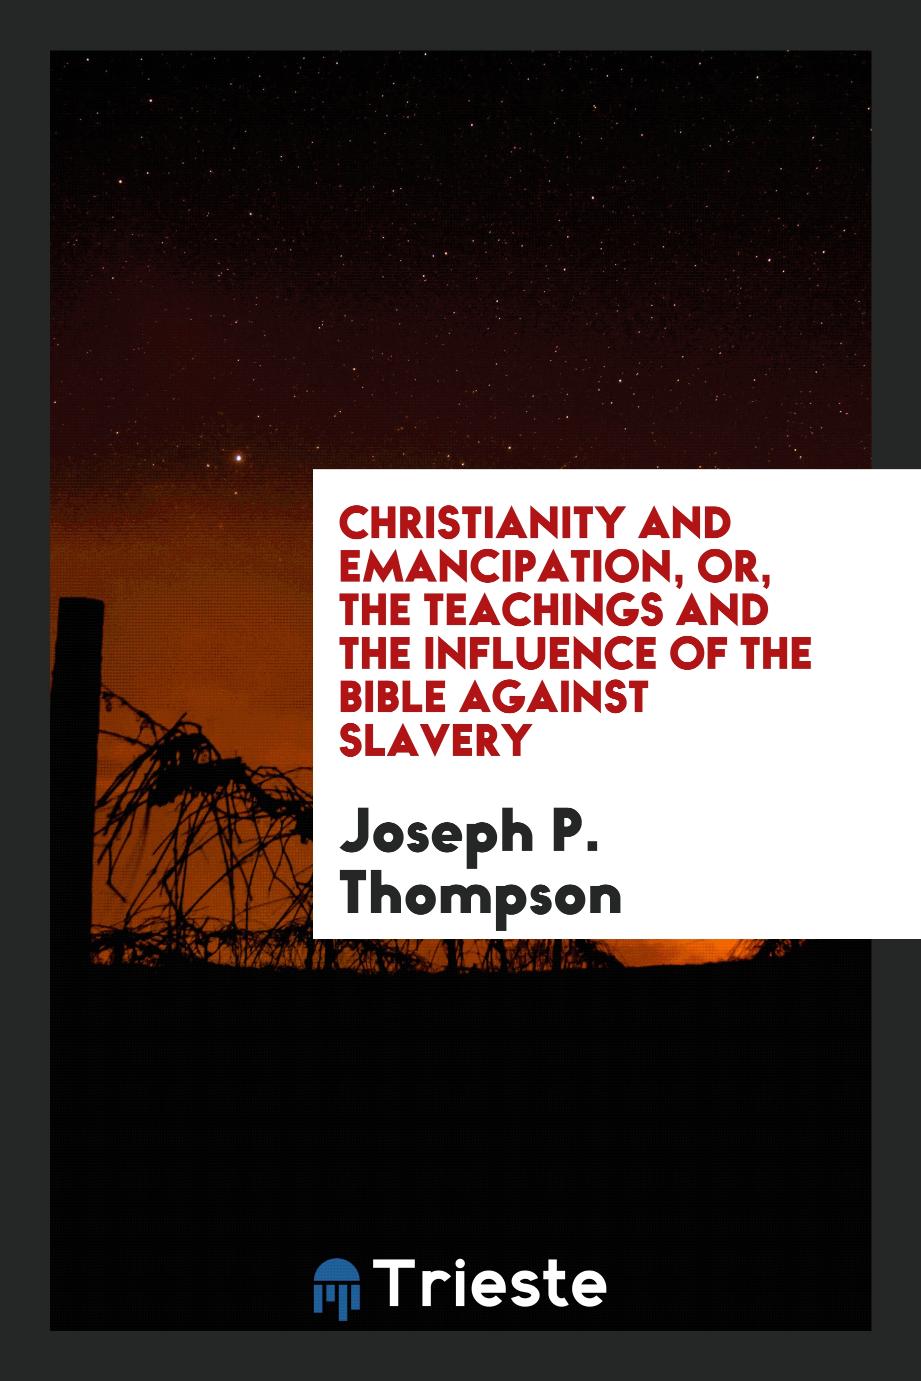 Christianity and Emancipation, Or, The Teachings and the Influence of the Bible Against Slavery